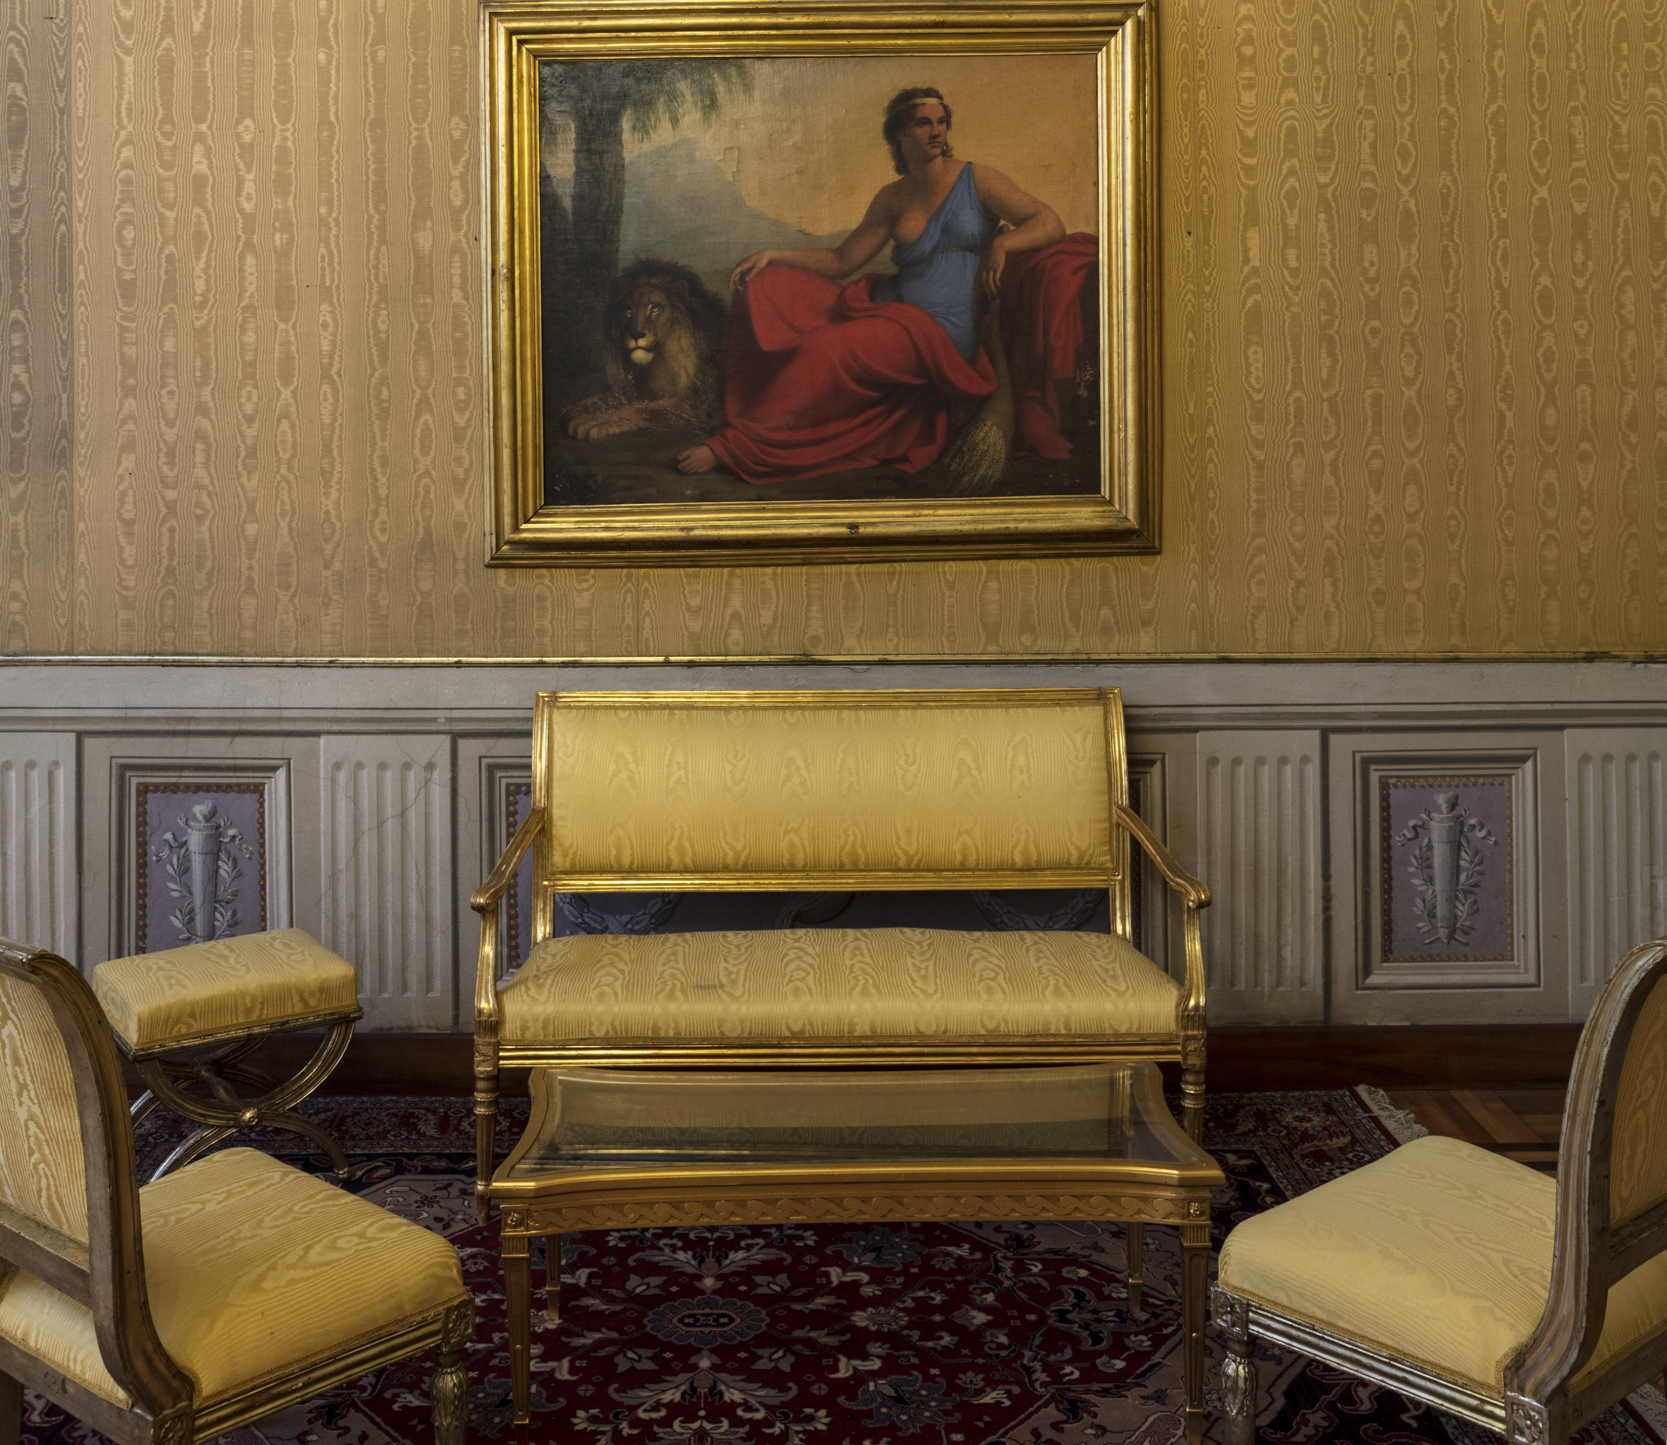 The Zephyr and Flora Lounge: wall with a painting illustrating the continent of Africa, represented by a woman with a lion crouching at her feet and corals on her ears, features alluding to the continent’s animals and its costumes.